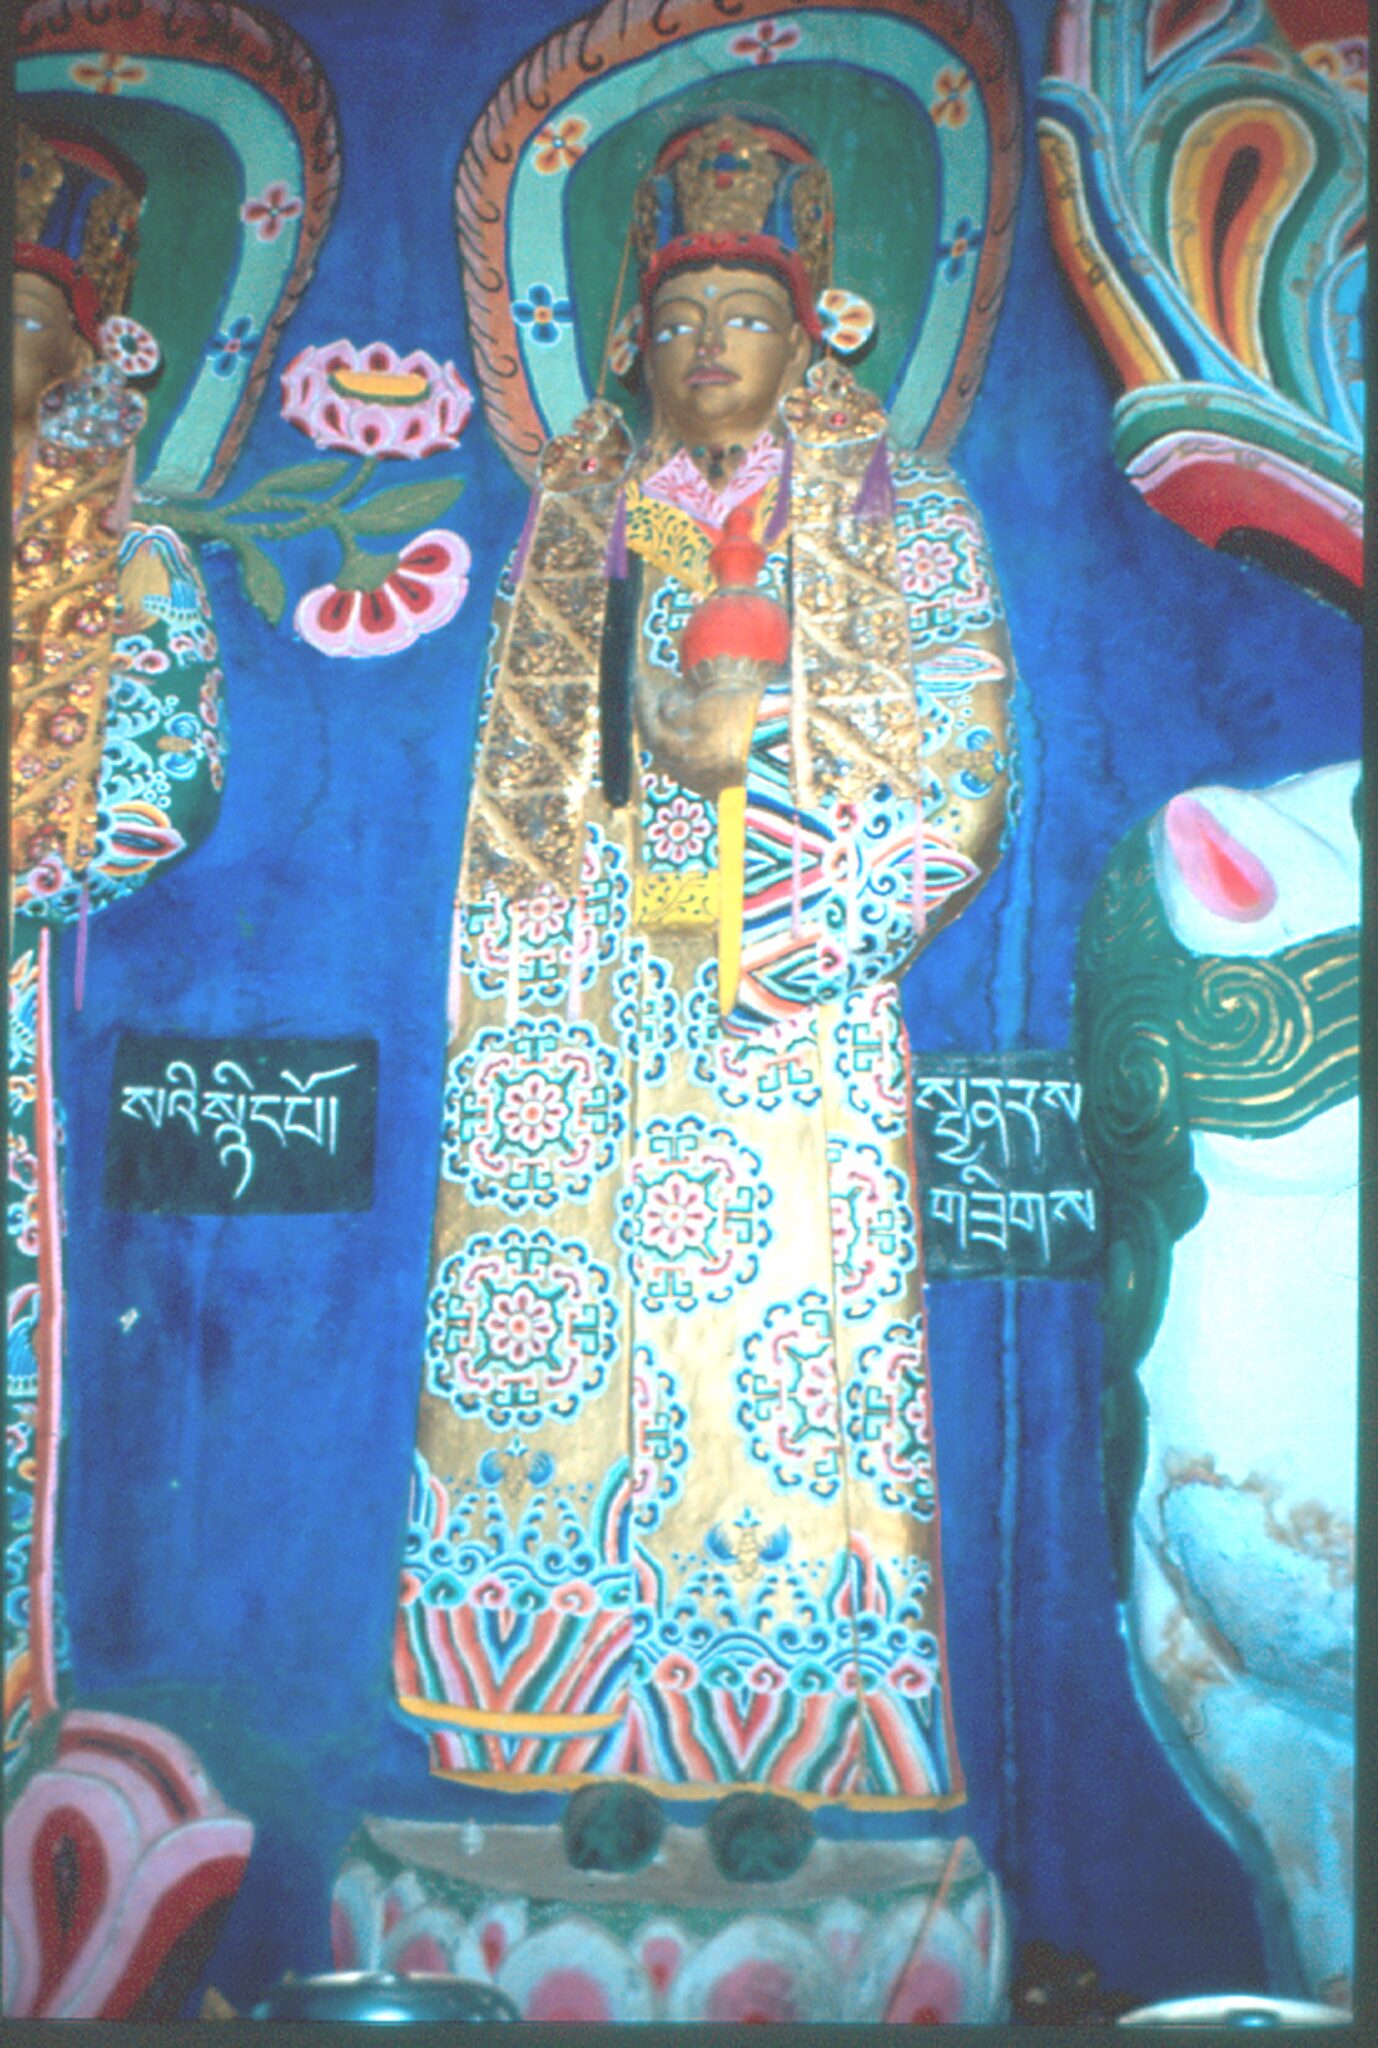 Statue of Bodhisattva wearing gold robe with rosette pattern standing against deep-blue wall